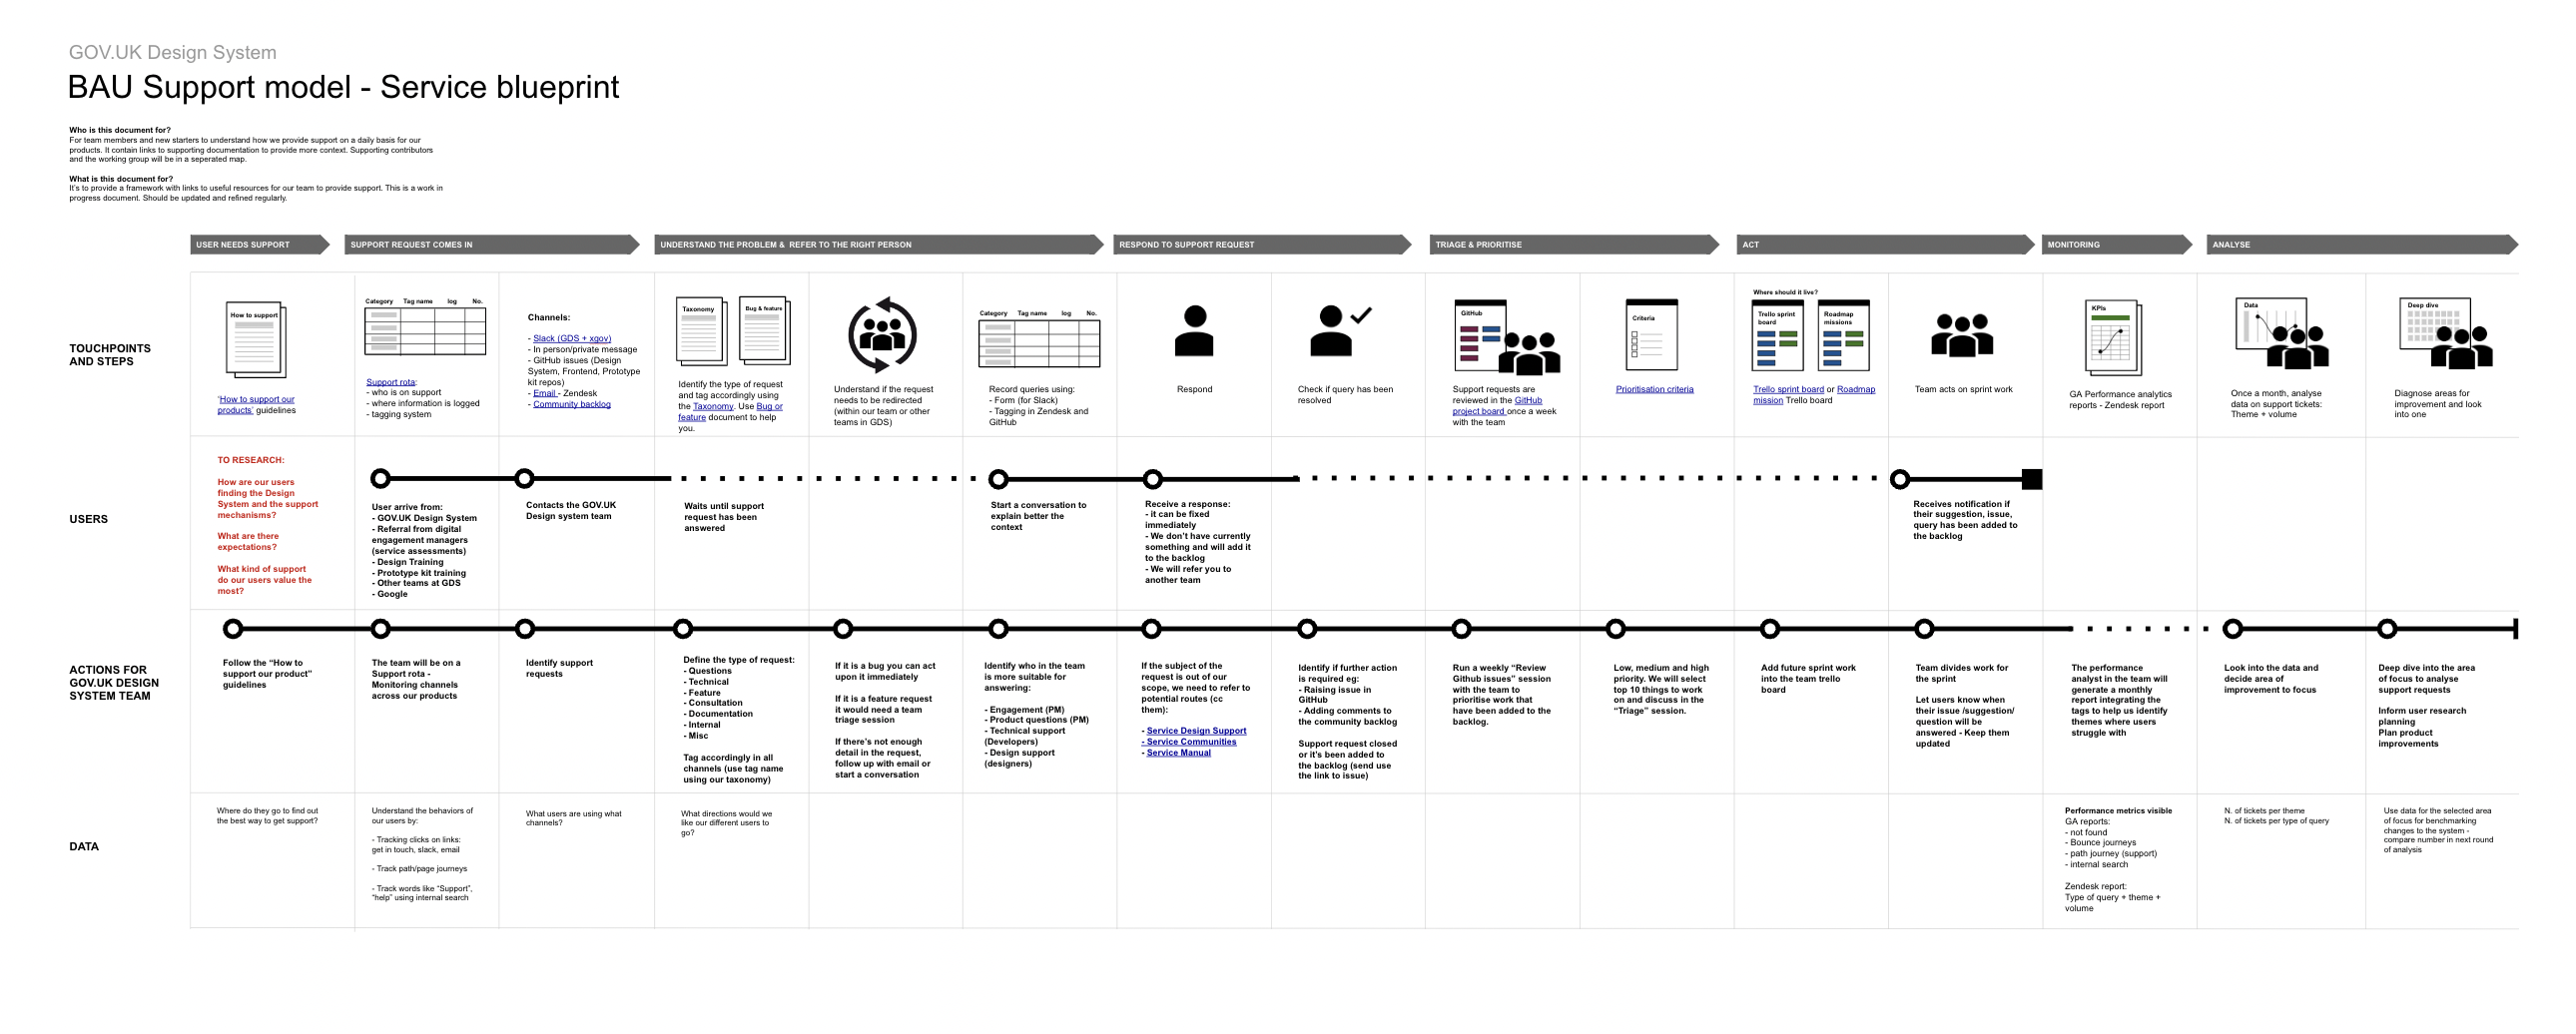 A screenshot of a blueprint for a support model. It shows from left to right high level steps from a user gets in touch with the team for support until its been resolved and then analised by the team. The blueprints shows under each step the touchpoints, users, actions for the design system team, and data collected. 